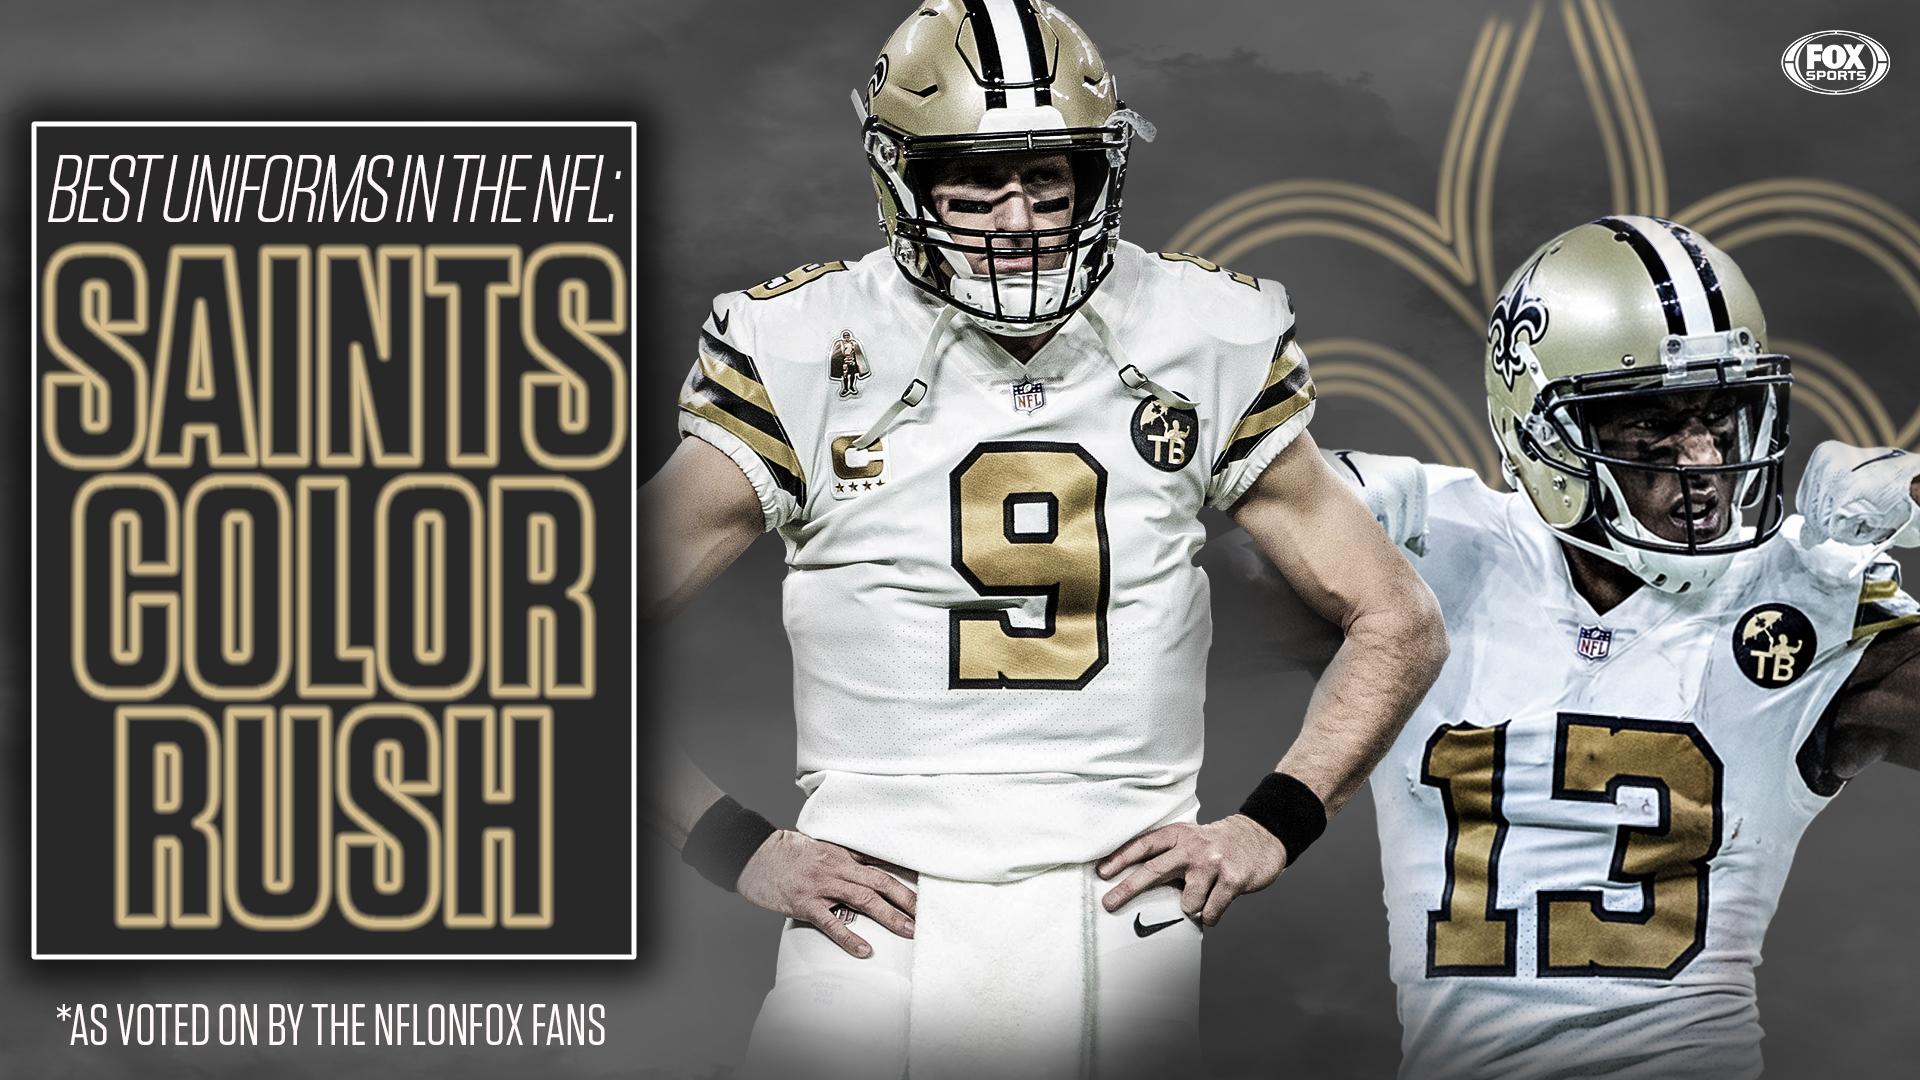 FOX Sports: NFL on X: "We asked and you answered... The @Saints color rush  uniforms are the best uniforms in the NFL, according to the NFL on FOX  fans. https://t.co/JVHEvU2Ahw" / X